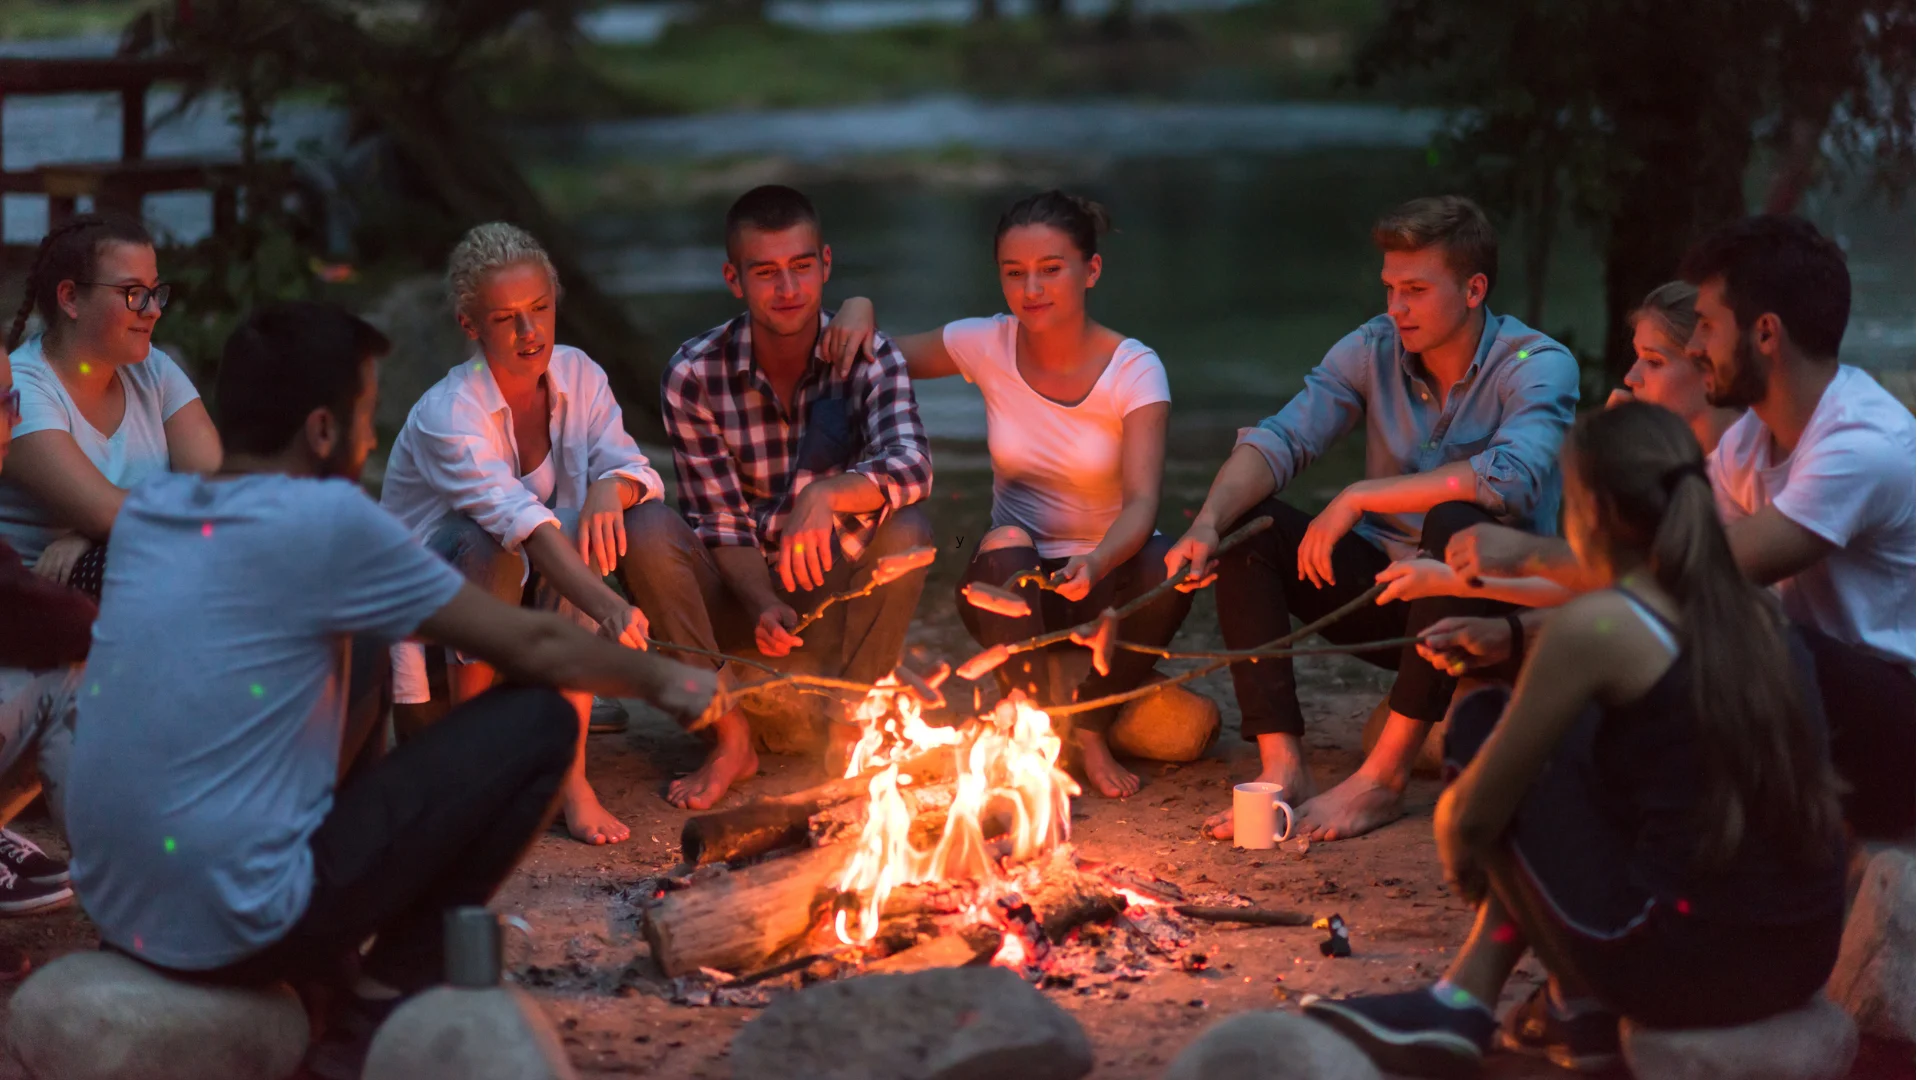 Adults playing campfire drinking games